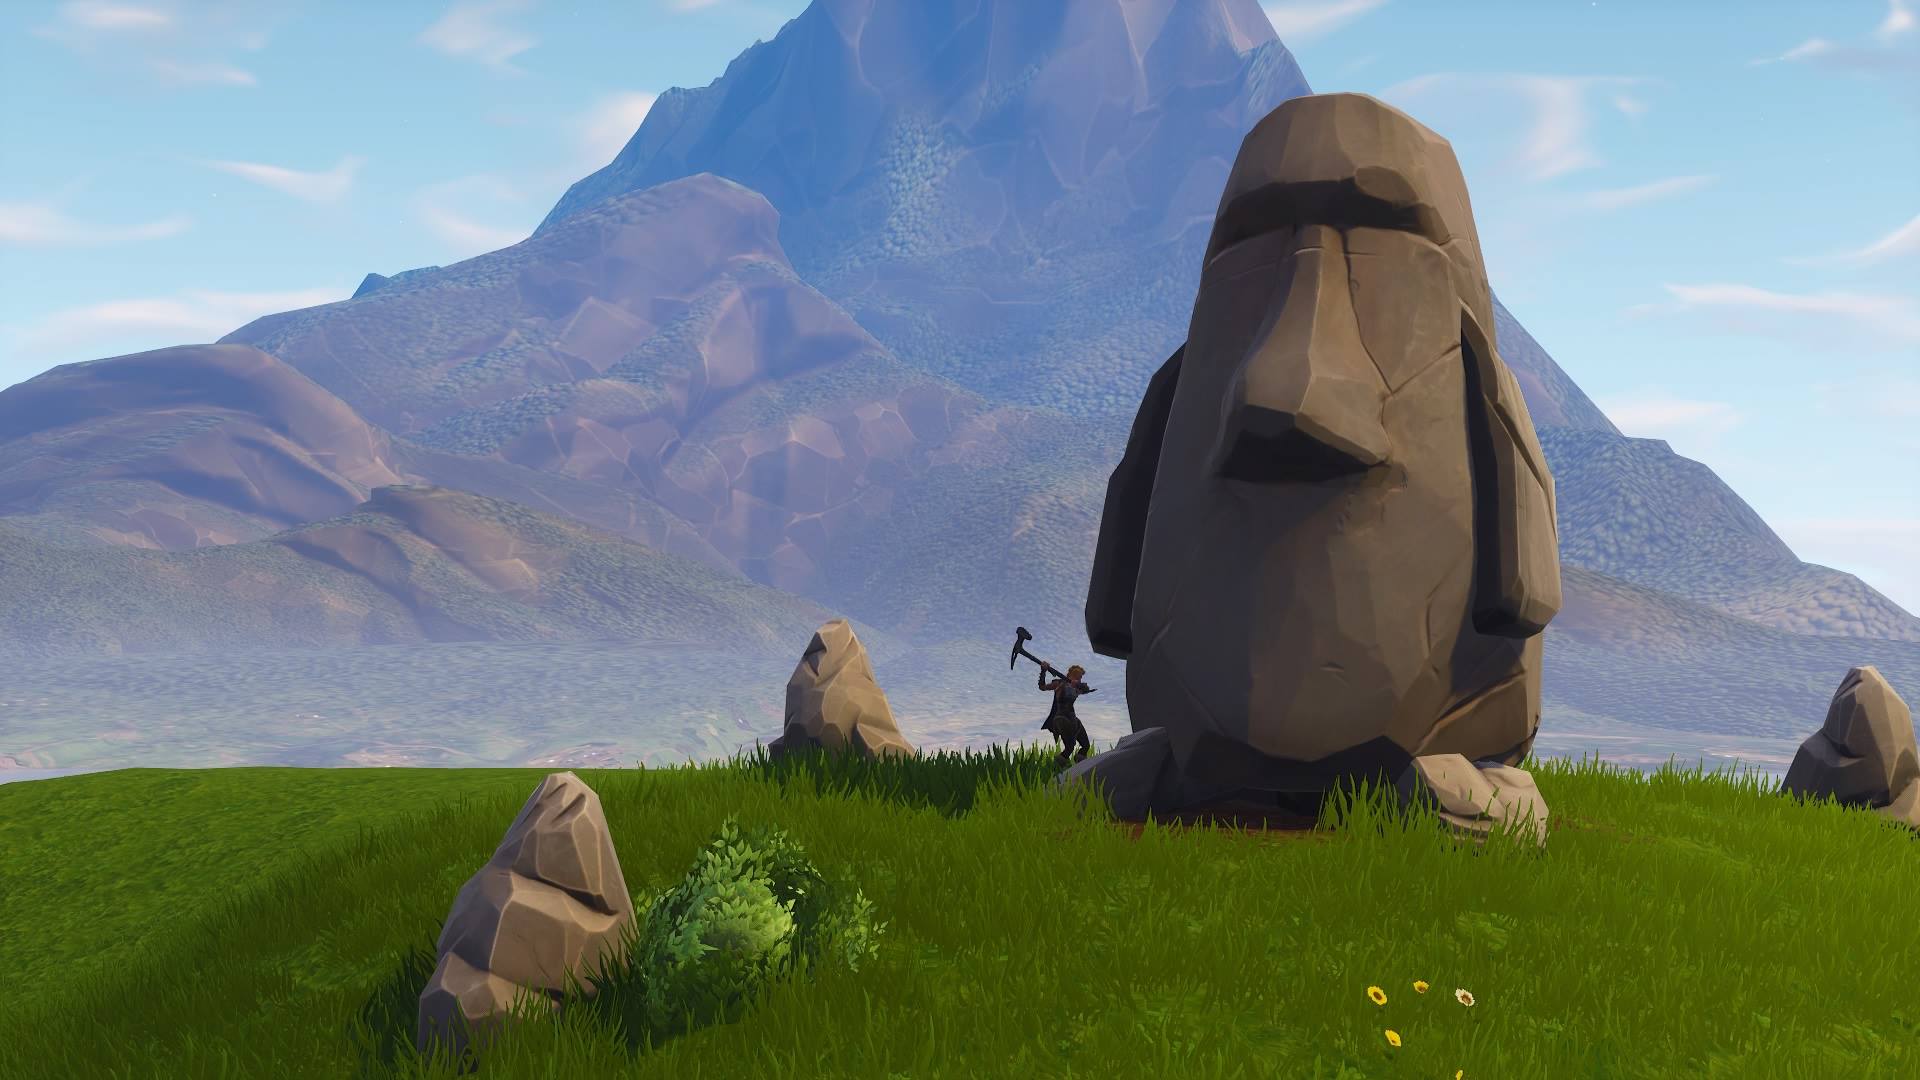 Fortnite Search Stone Heads Location Map And Video For Week 6 - fortnite search stone heads location map and video for week 6 challenge inverse